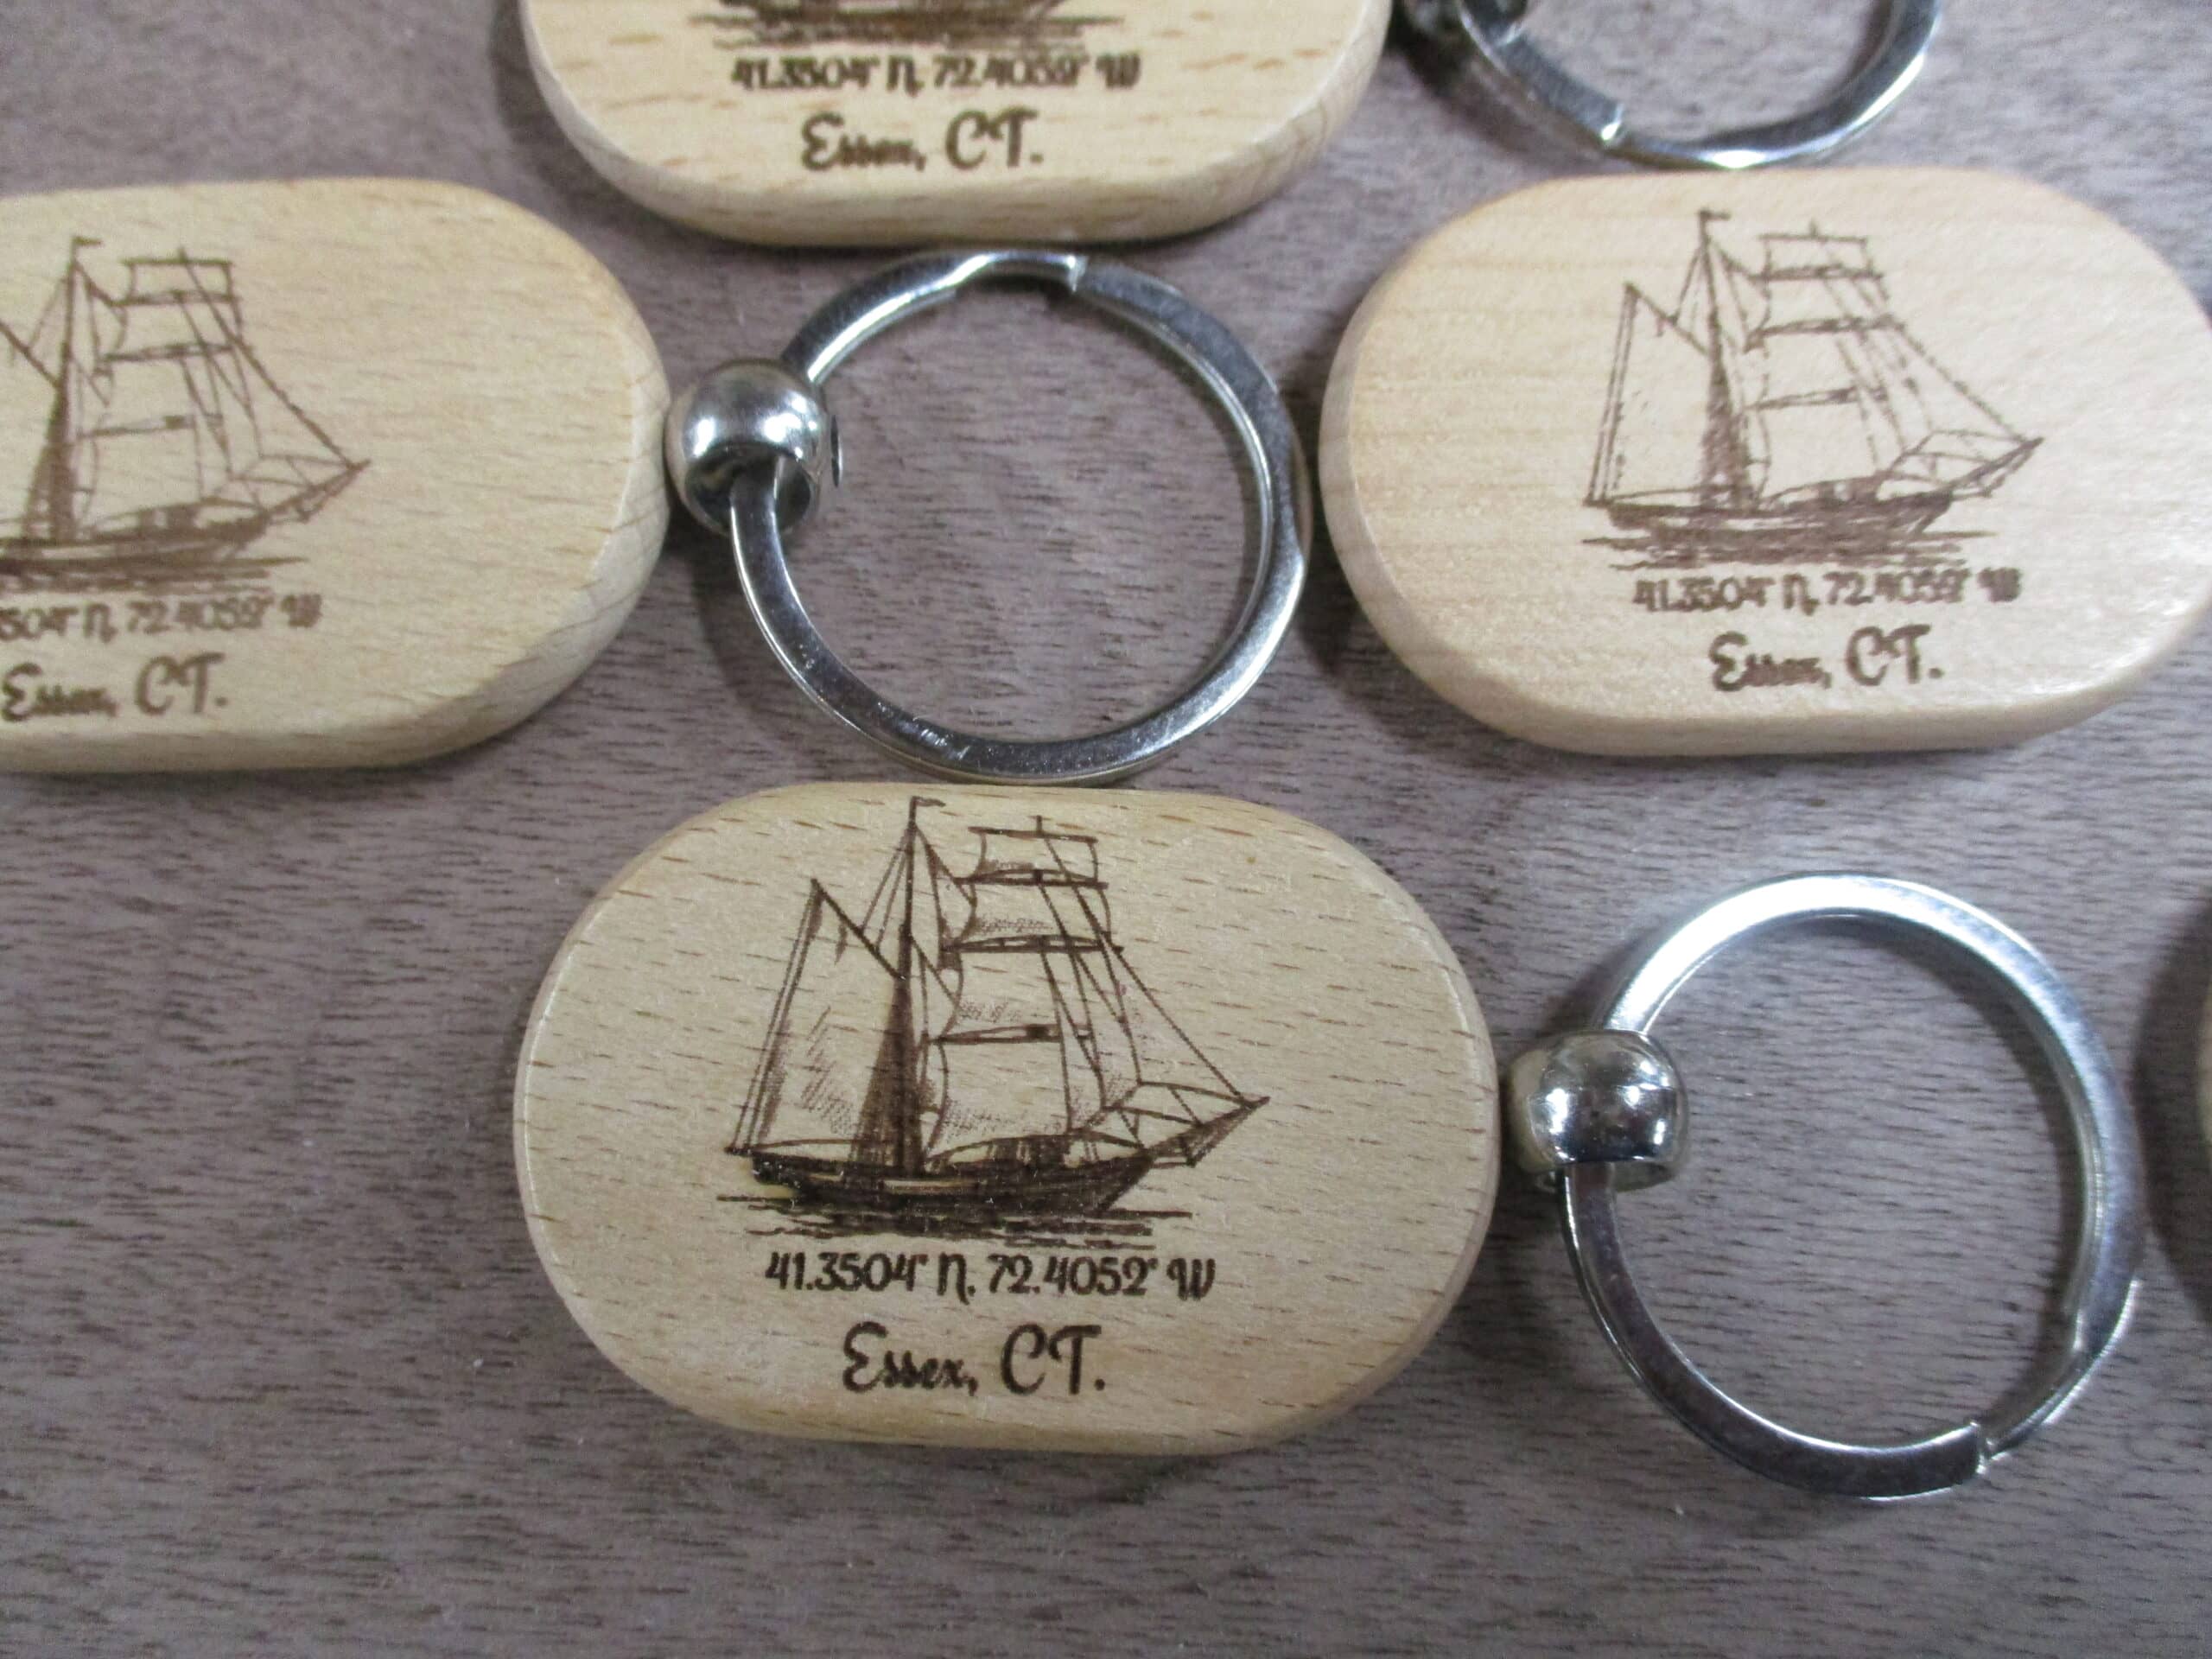 Laser engraved keychains as a gift.